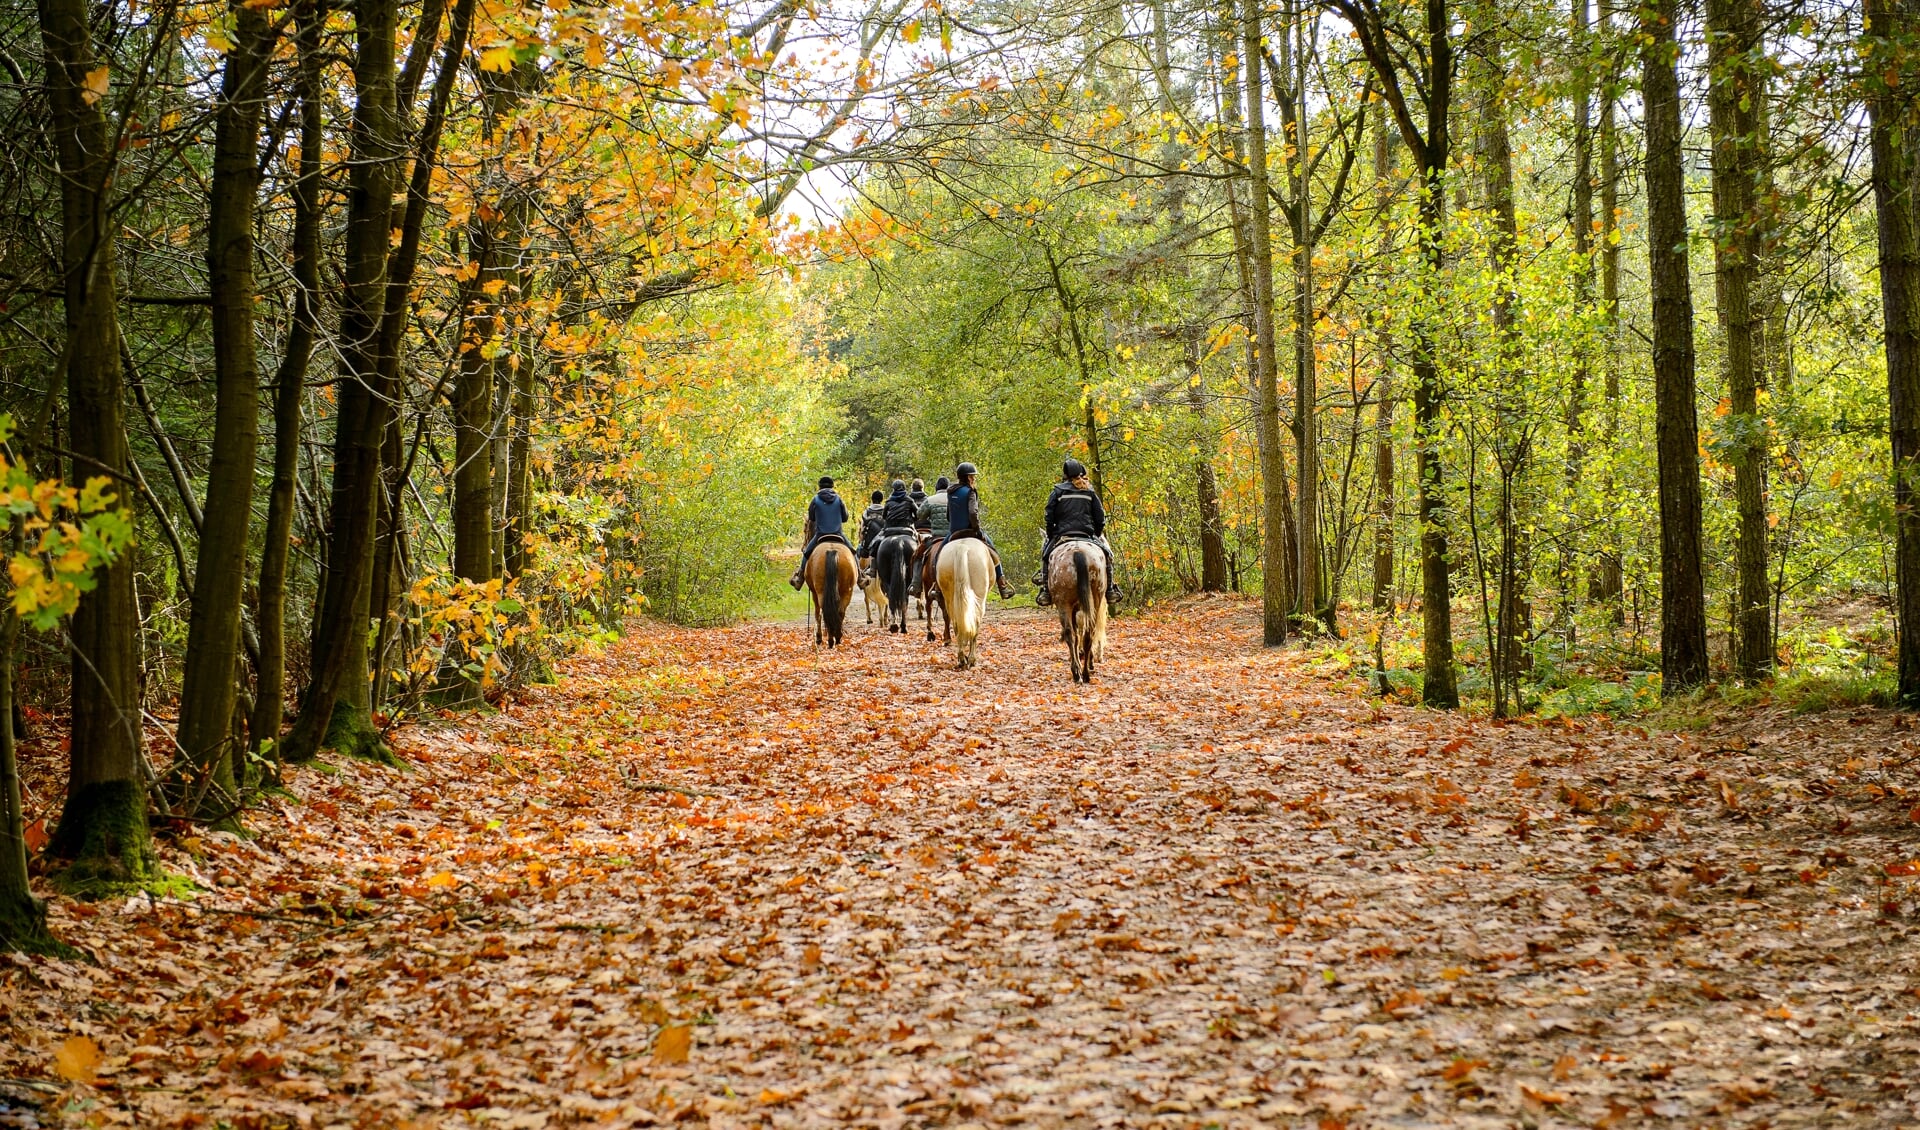 Rucphen, The Netherlands - October 29, 2013: Group of horse riders in the forest in autumn